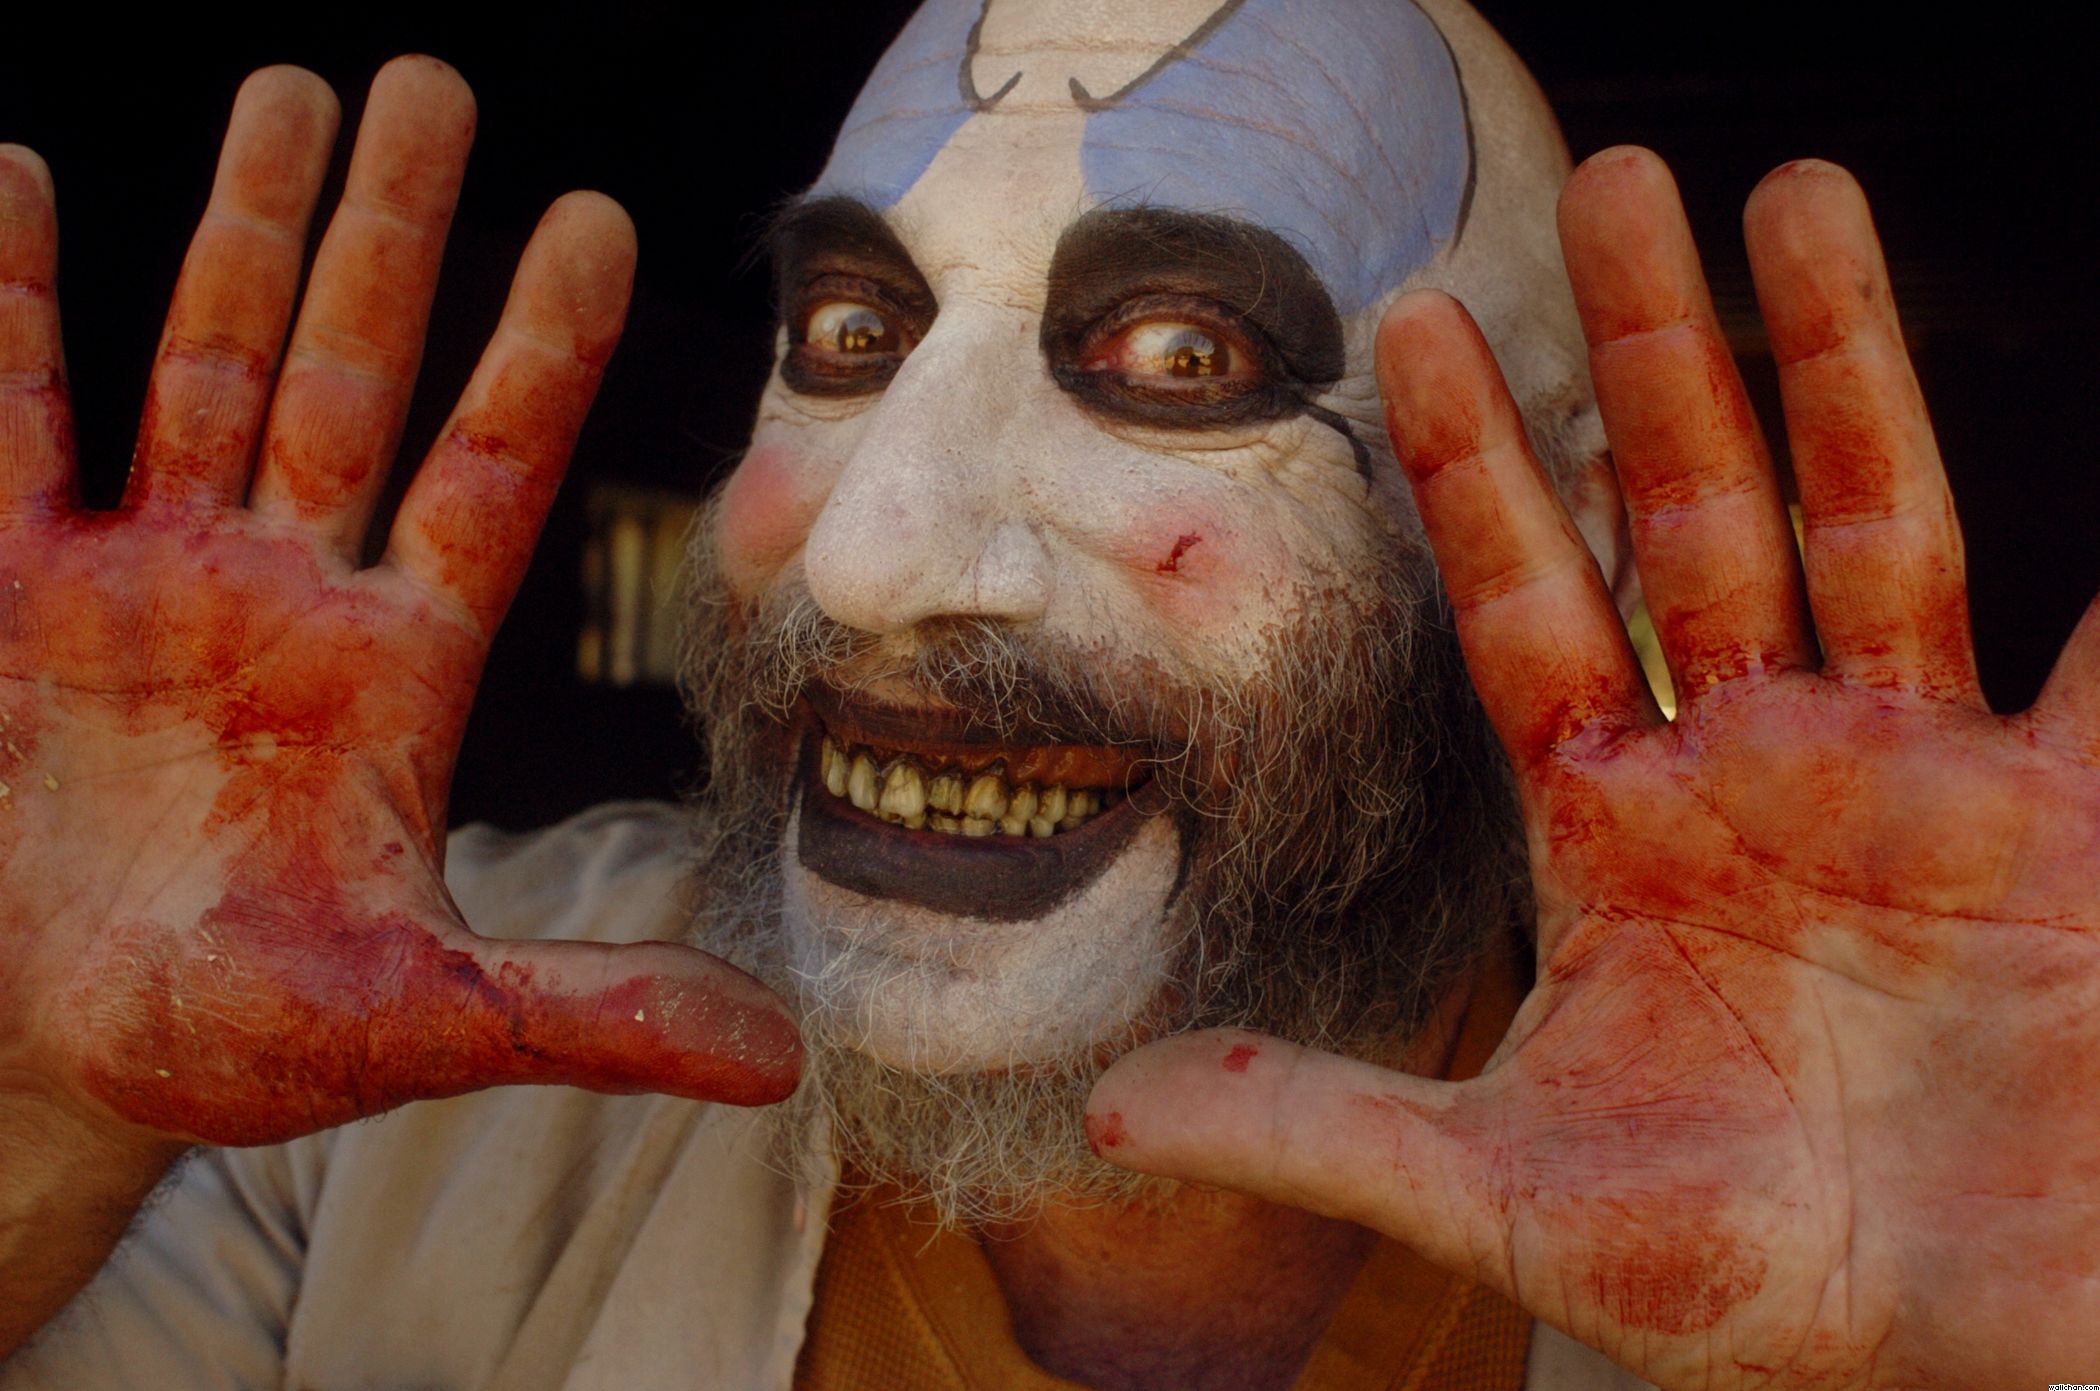 6- House of 1000 Corpses (2003) - Captain Spaulding.